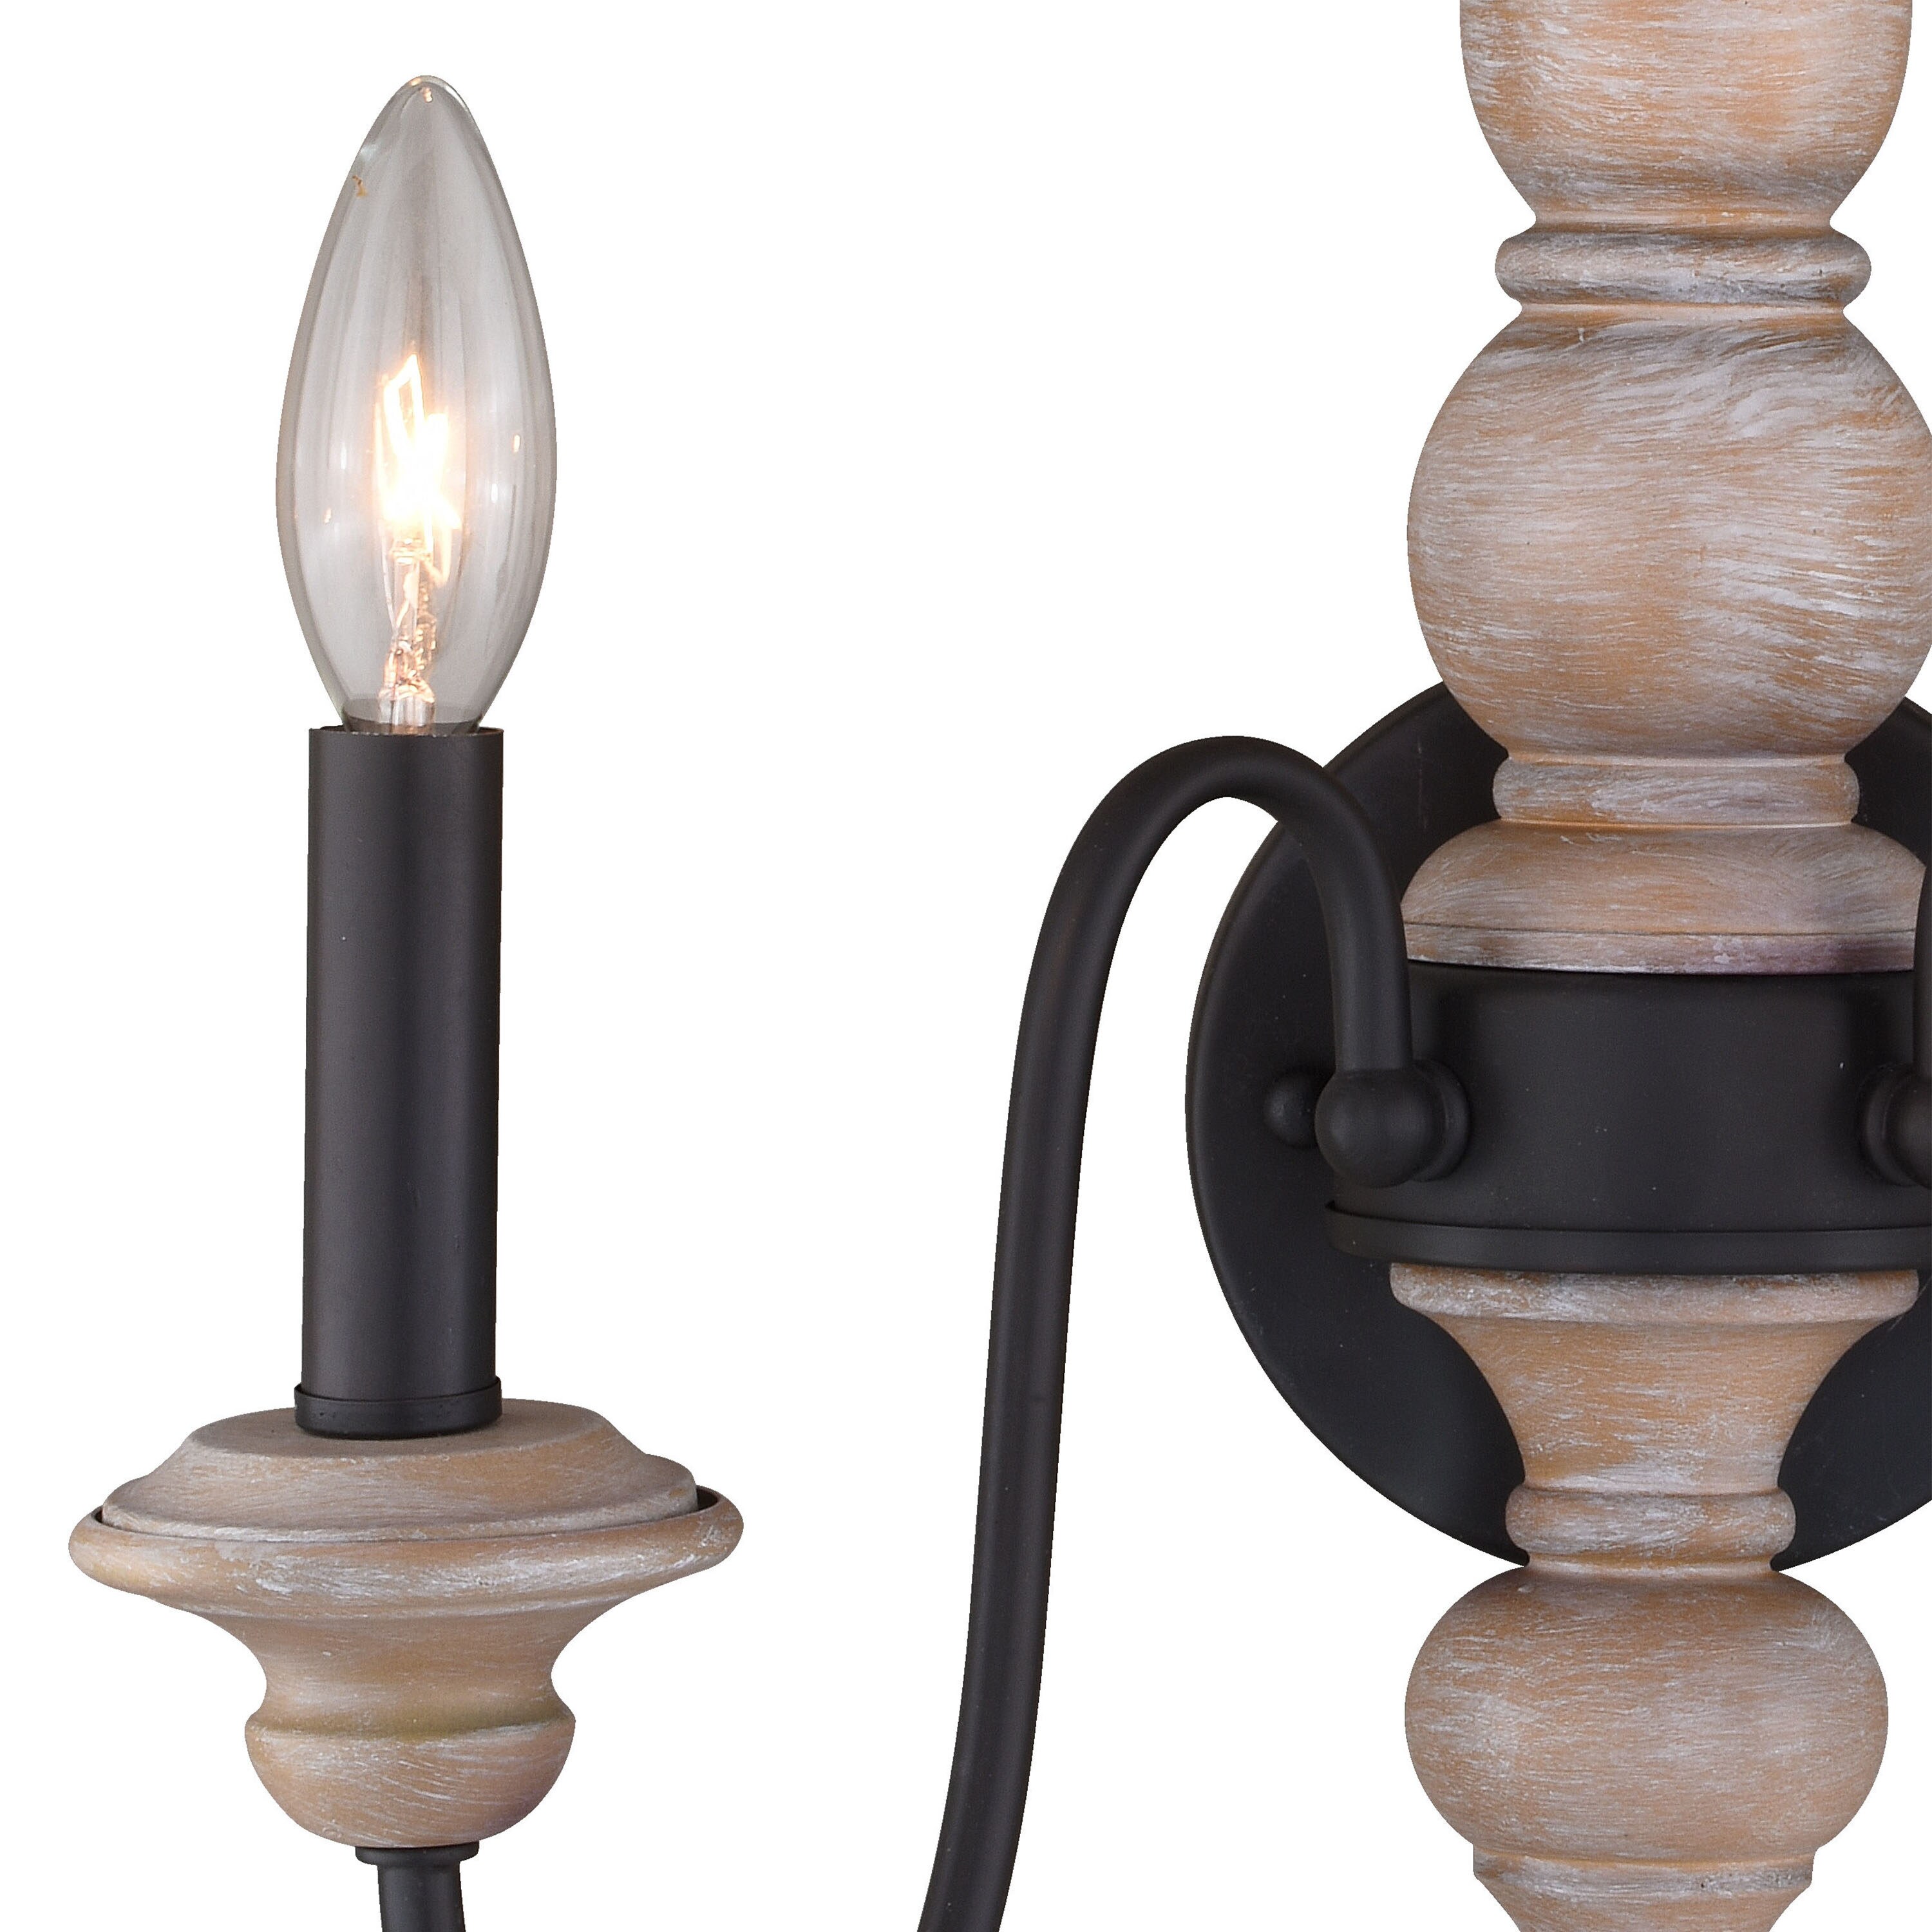 Breamore Candle Sconce, Wall Mounted Lights, Lighting